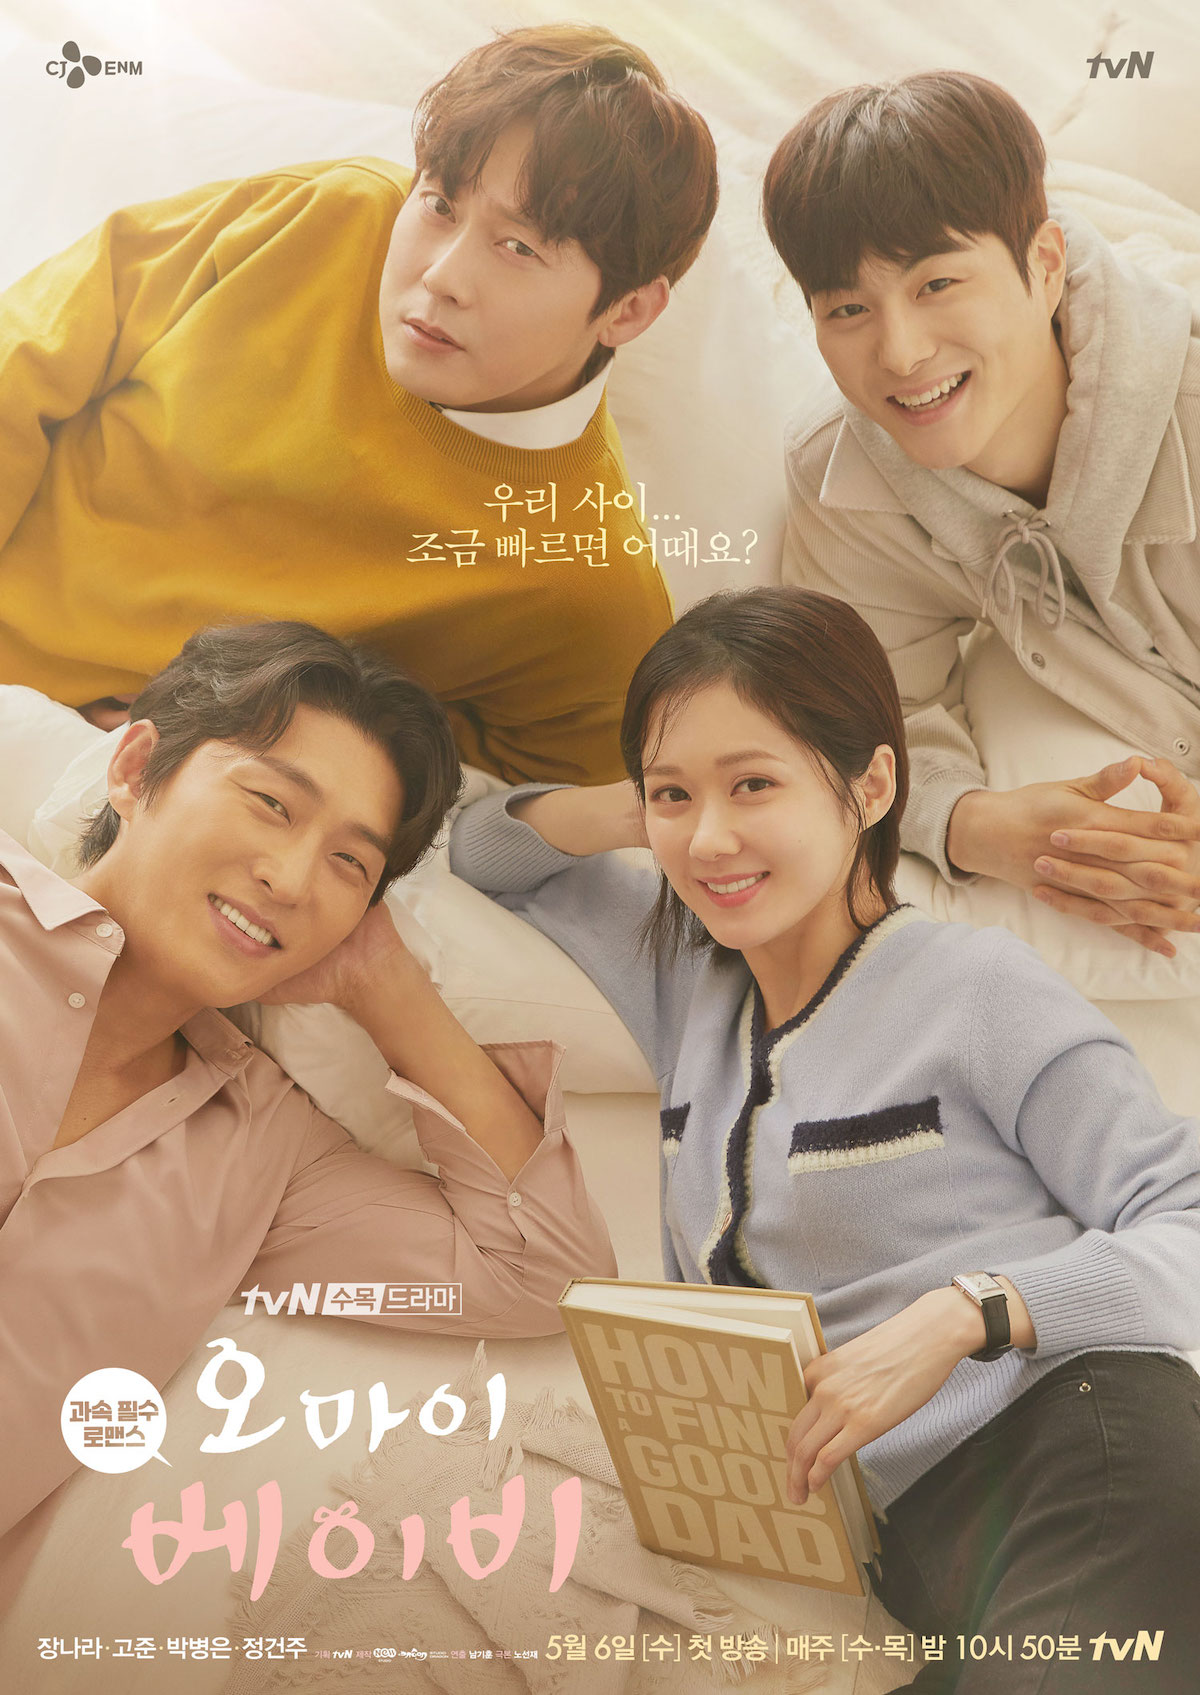 tvn-oh-my-baby-releases-new-poster-with-jang-na-ra-go-joon-jung-gun-joo-and-park-byung-eun-2